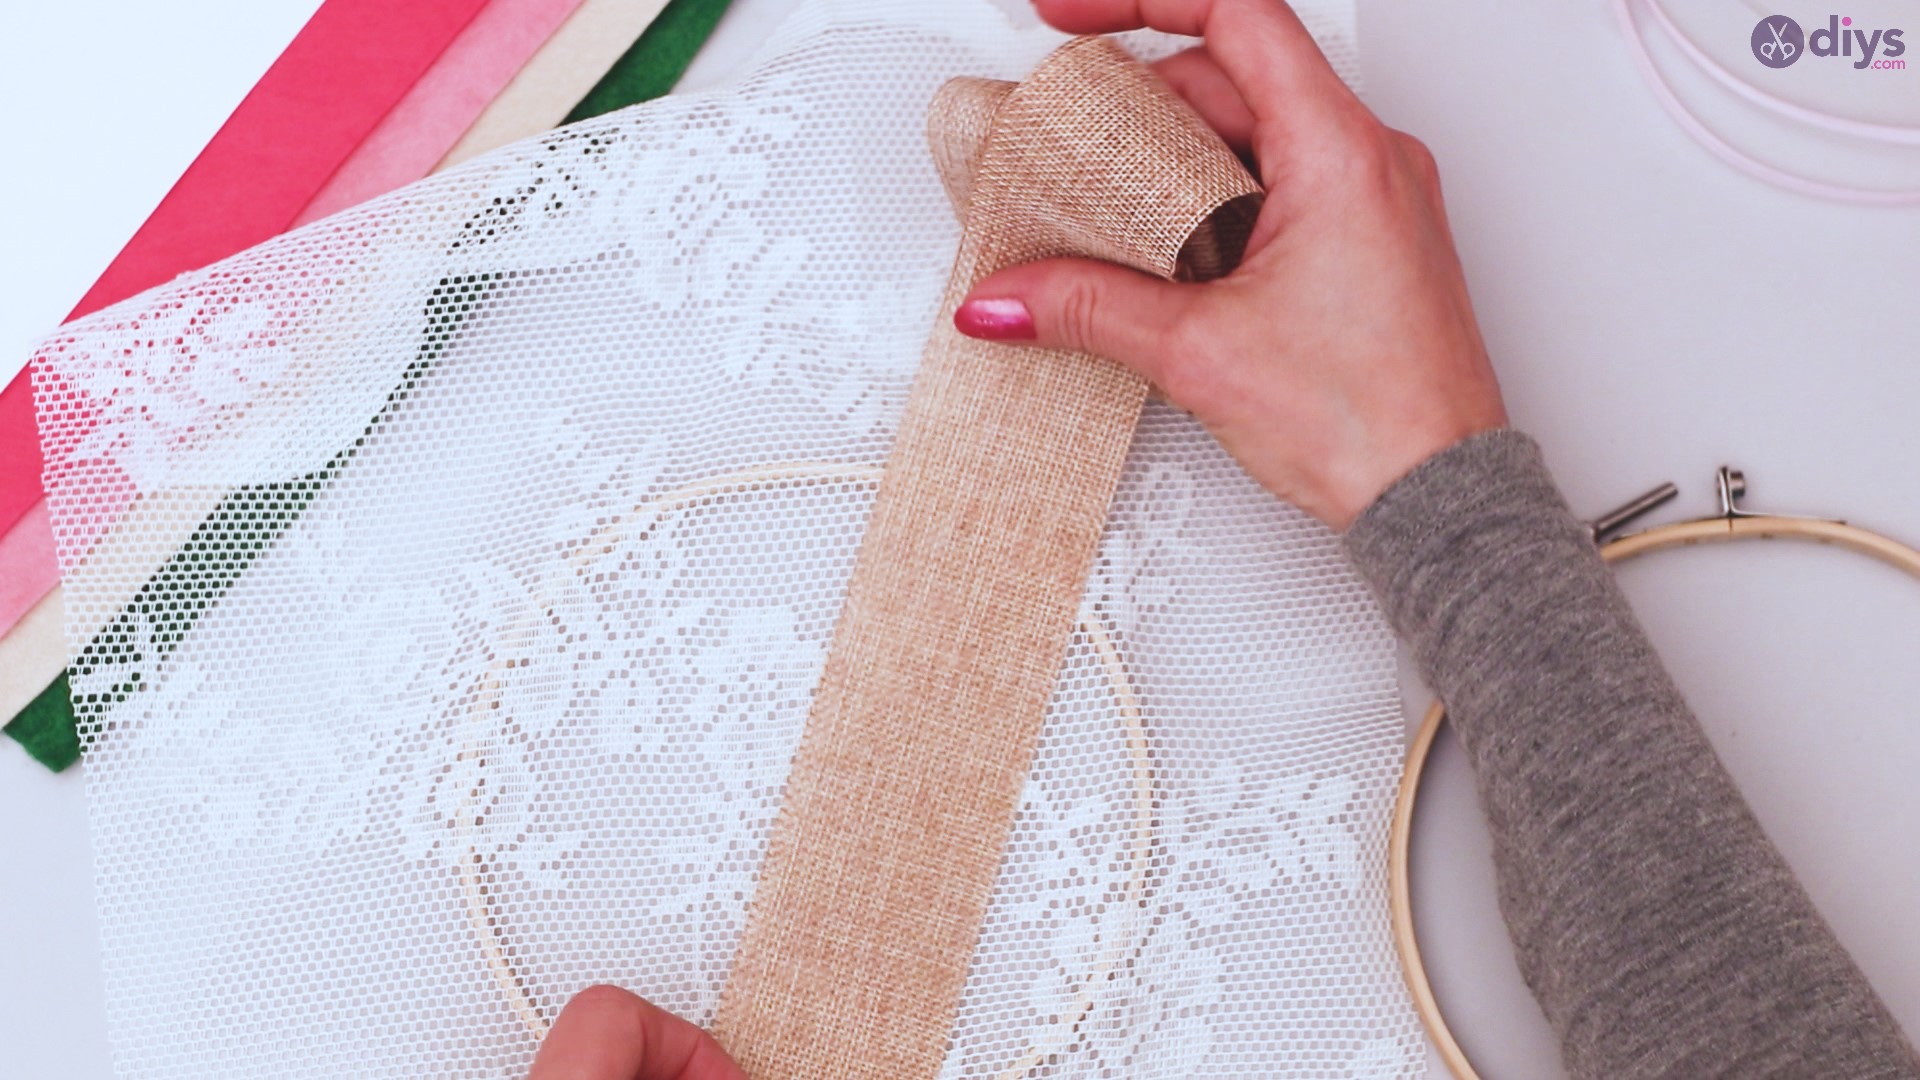 Diy embroidery hoop wall decor tutorial step by step (3)